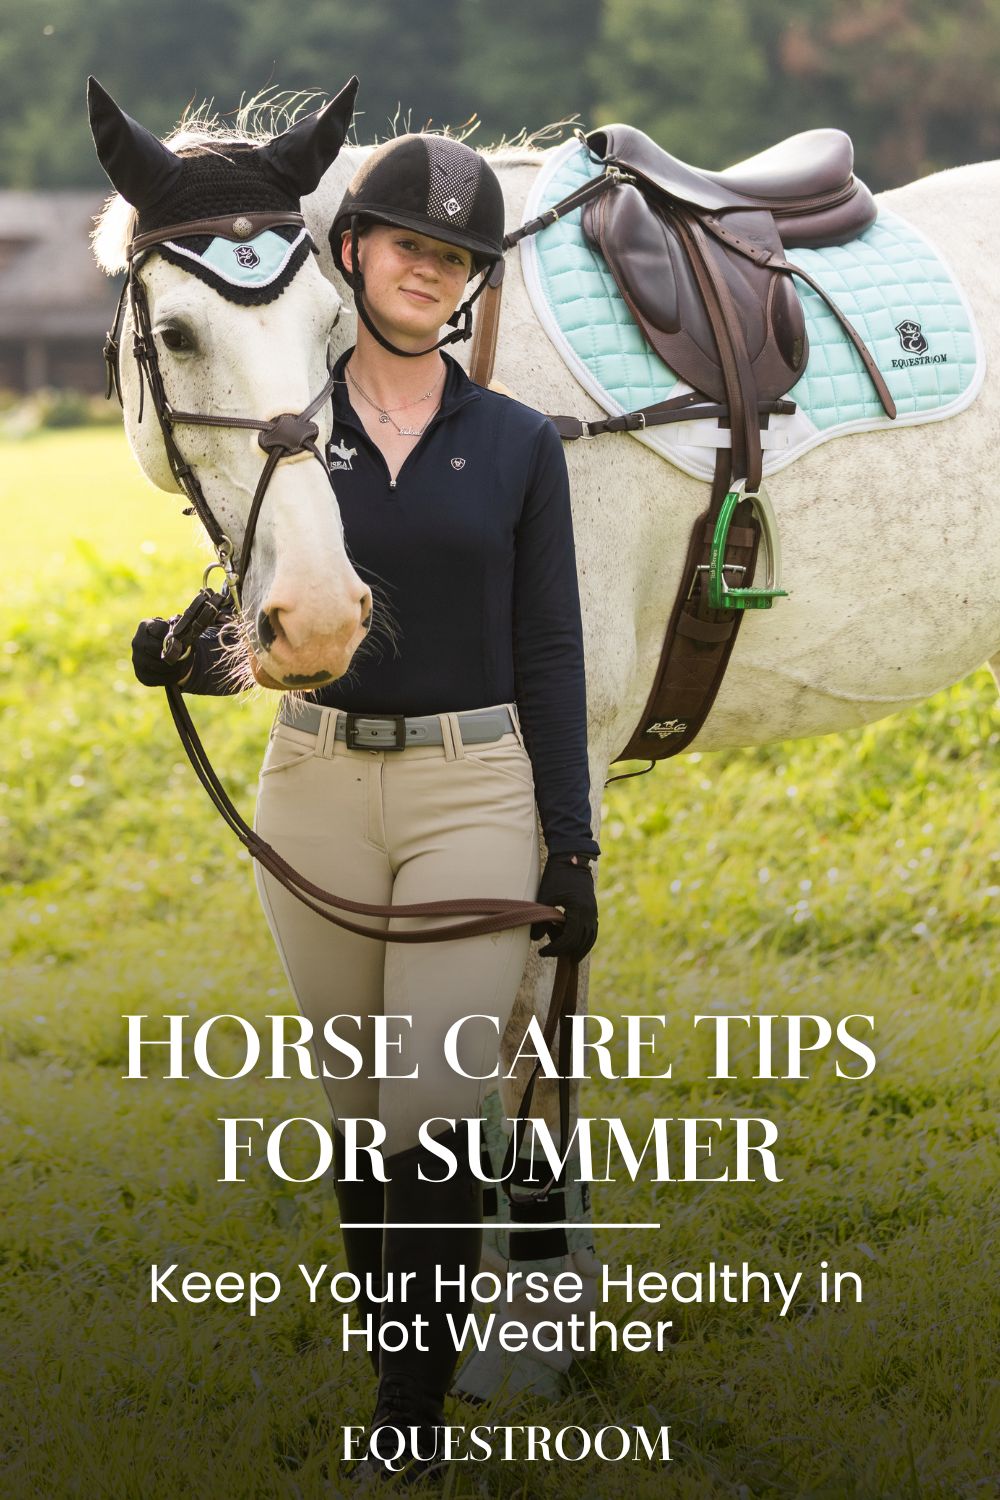 7 HORSE CARE TIPS FOR SUMMER